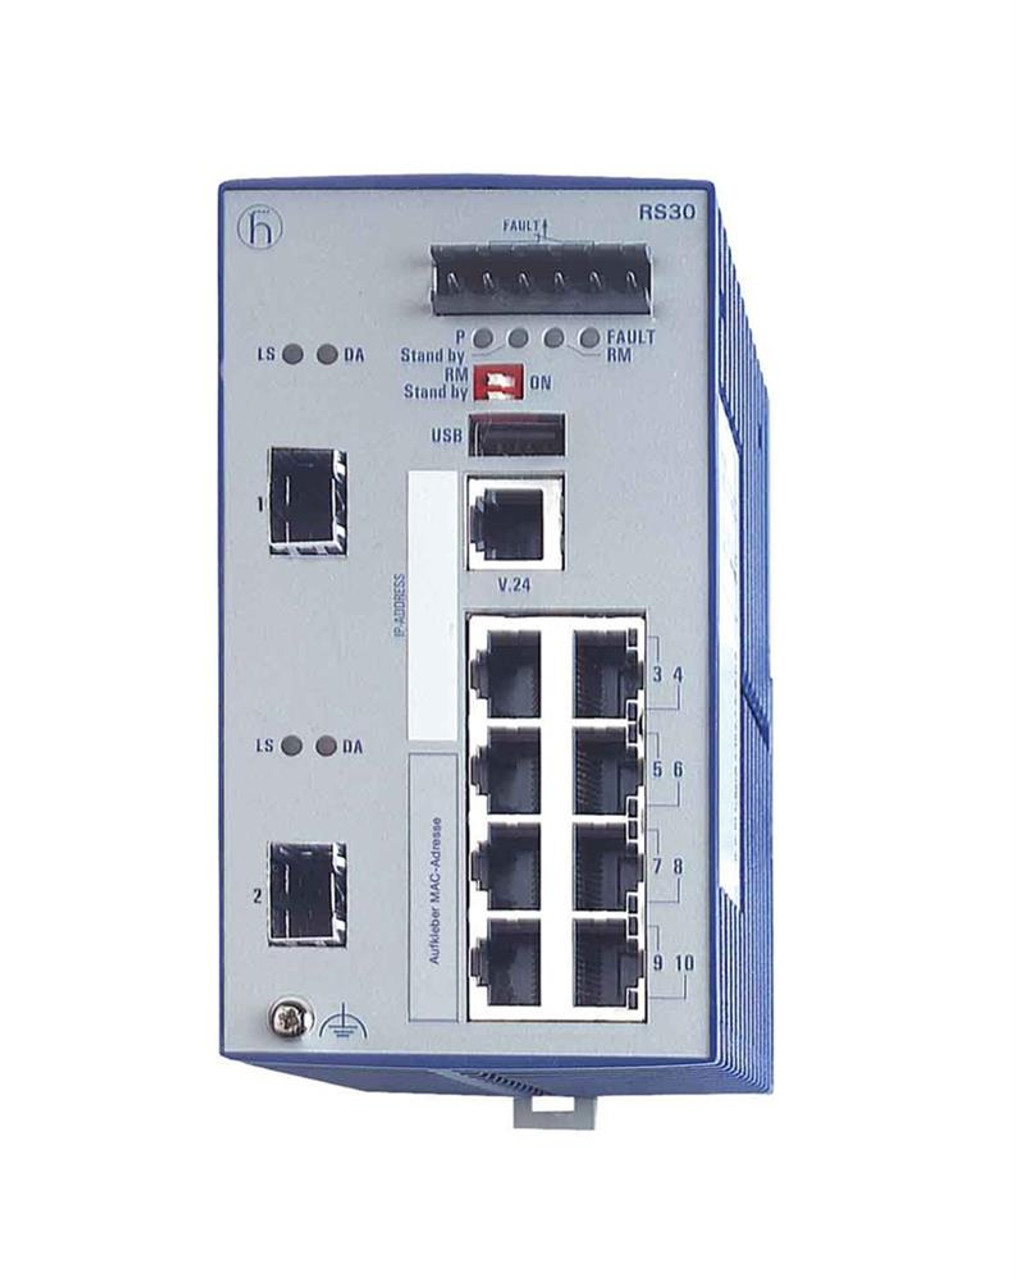 Hirschmann Mananaged Industrial Ethernet Rail Switch 10 total Ports with 2 Gigabit (1000 Mbps) and 8 RJ45 Fast (100 Mbps) Copper Ports (Refurbished)